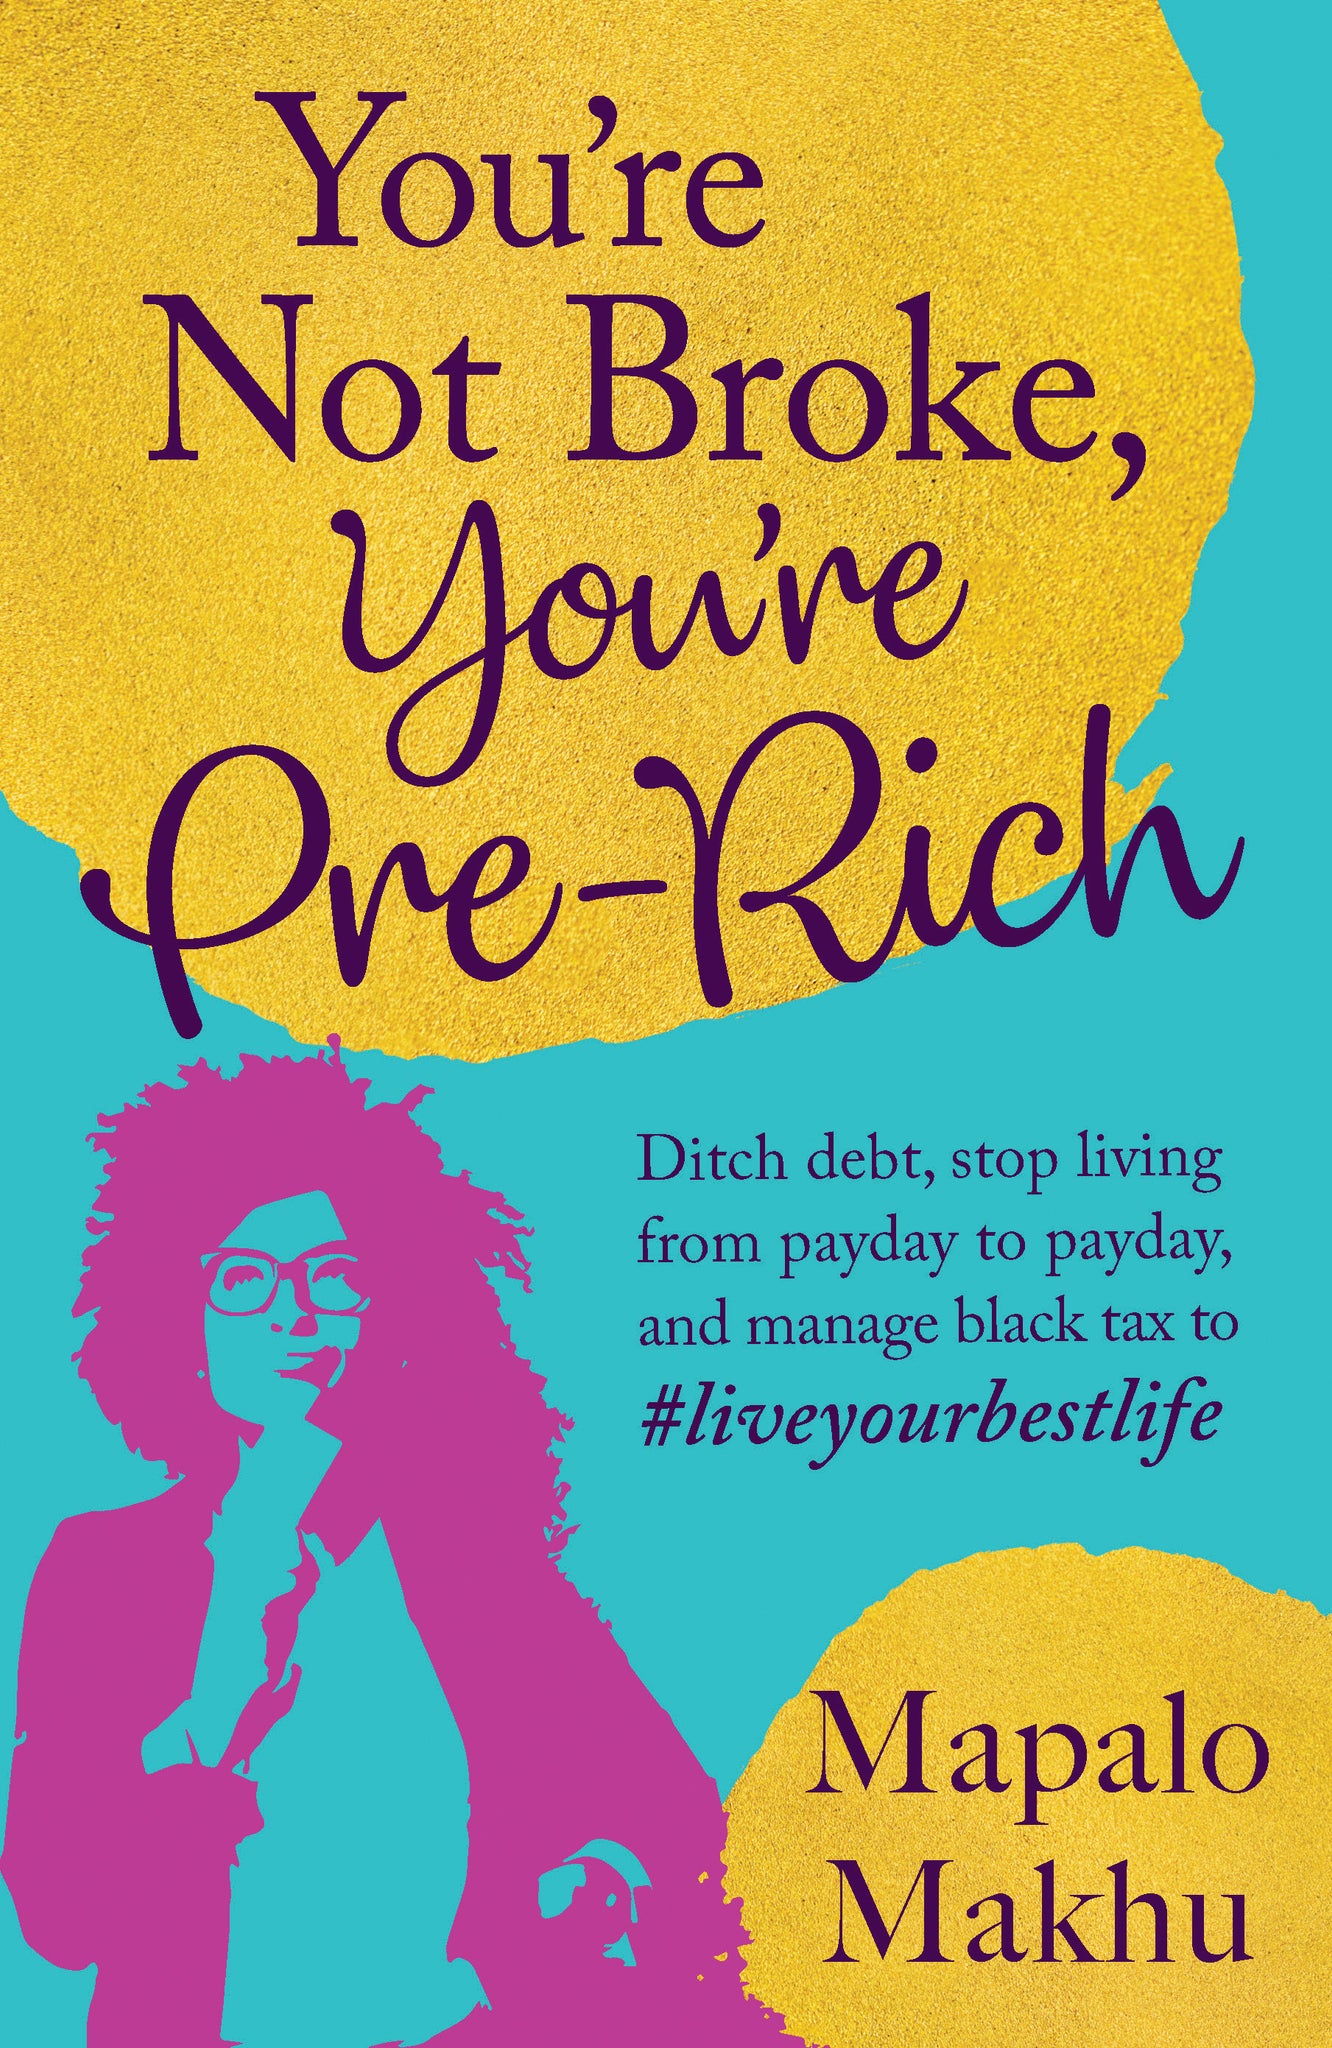 You’re Not Broke, You’re Pre-Rich: Ditch debt, stop living from payday to payday, and manage black tax to #liveyourbestlife by Mapalo Makhu